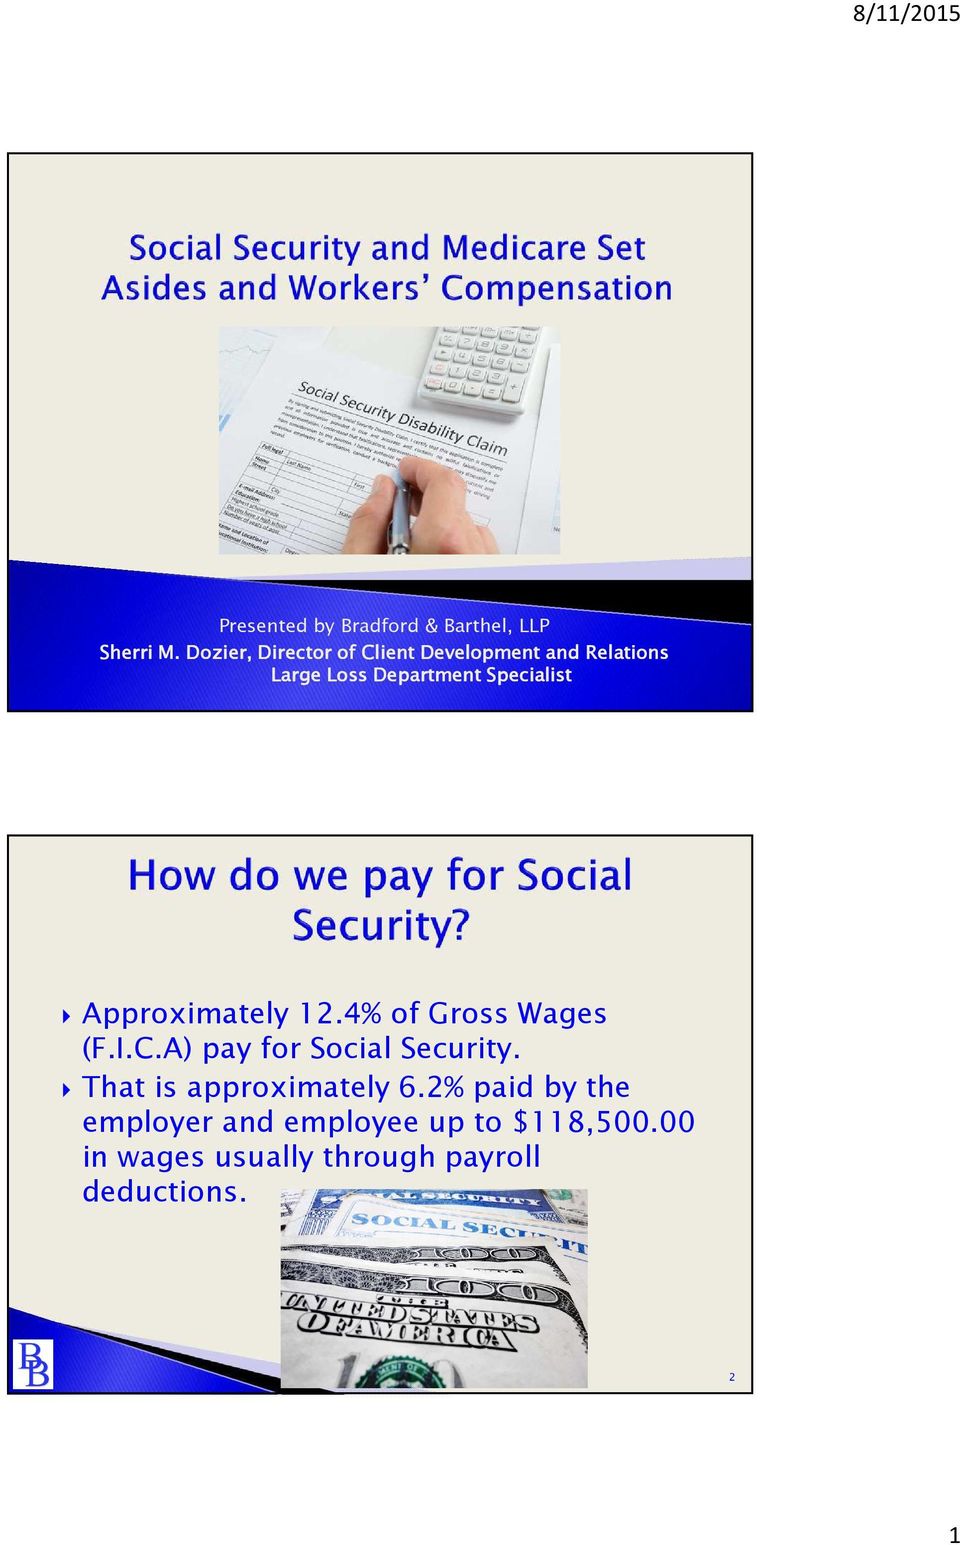 Approximately 12.4% of Gross Wages (F.I.C.A) pay for Social Security.